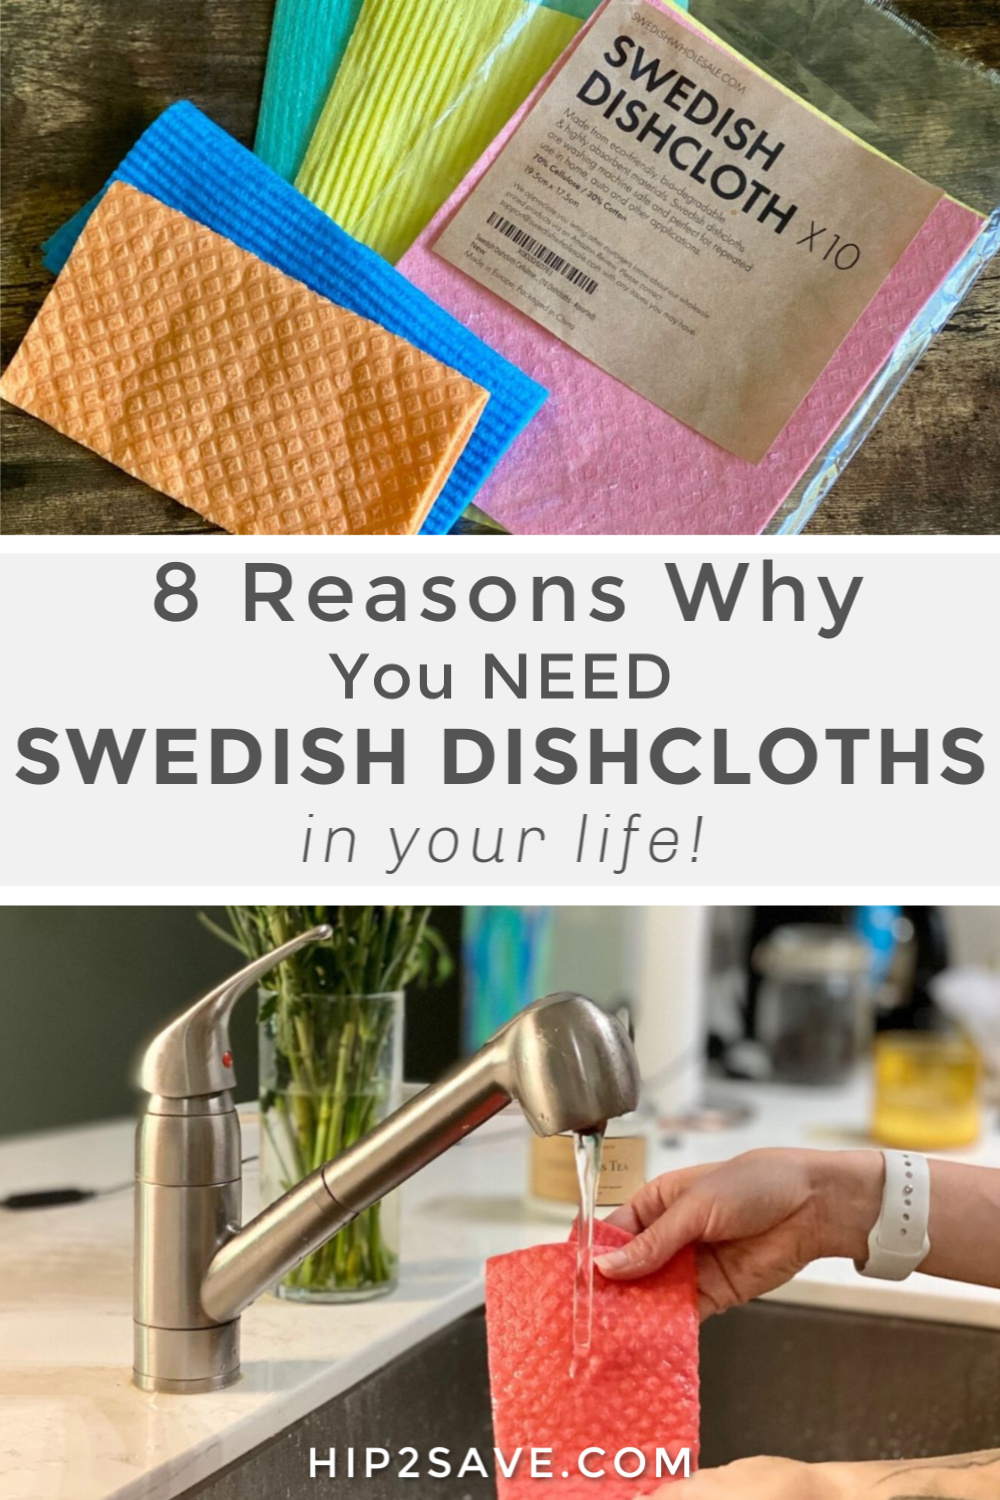 https://hip2save.com/wp-content/uploads/2020/04/swedish-dishcloth-product-review-pinterest.jpg?fit=1000%2C1500&strip=all